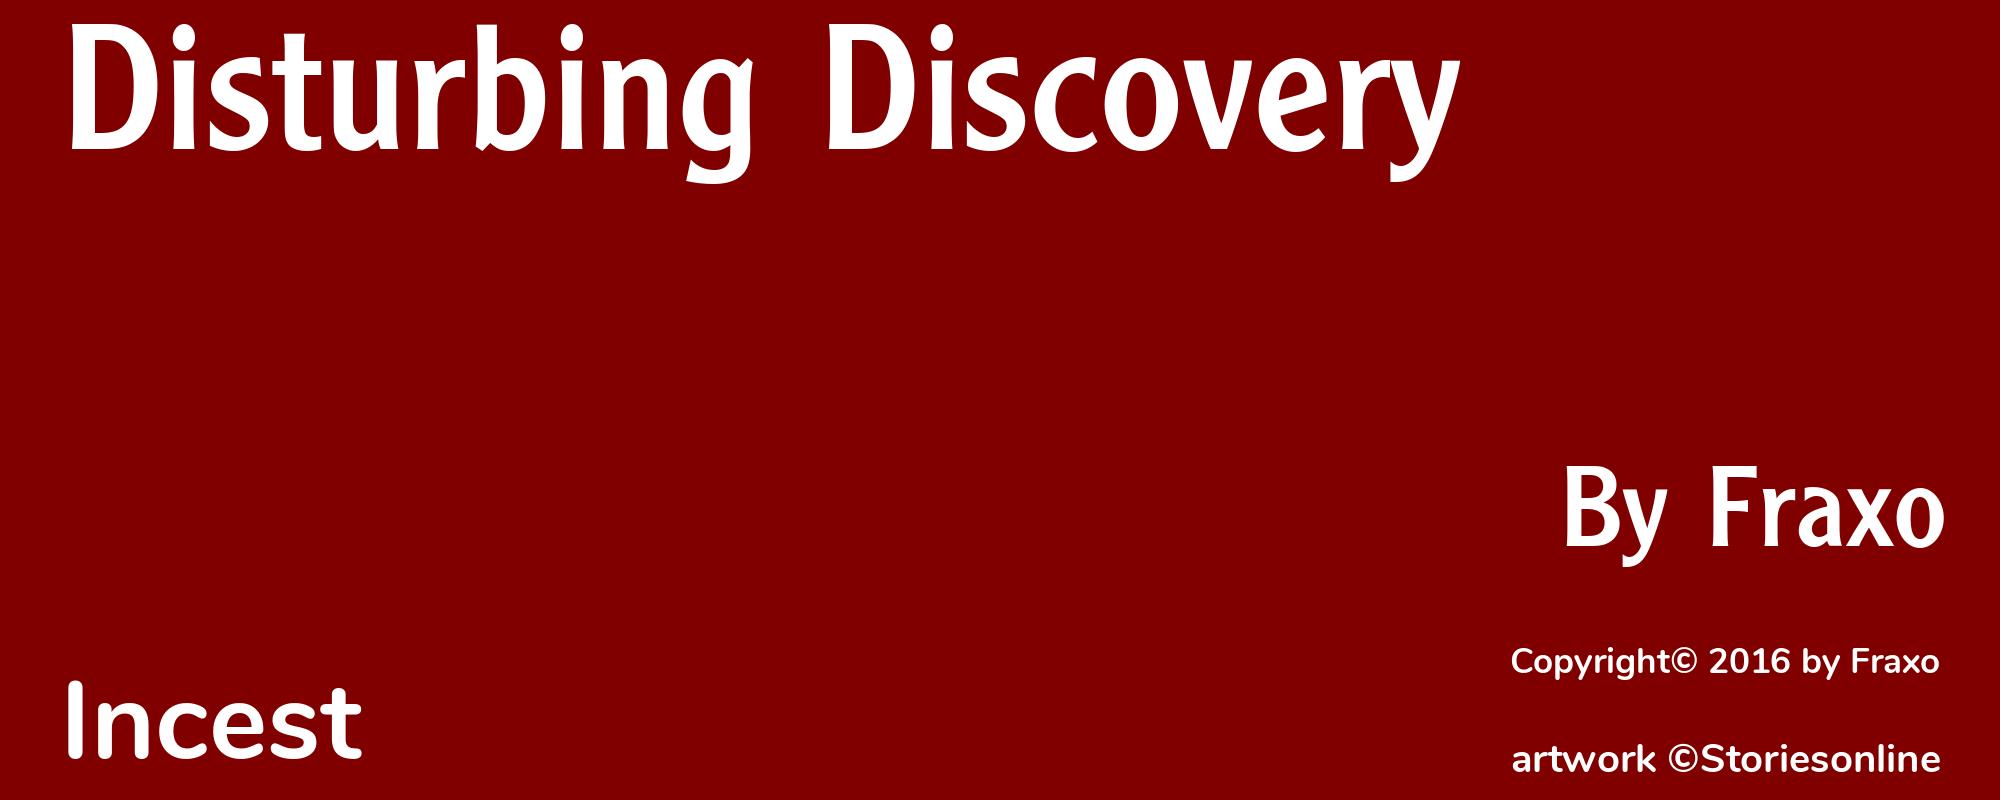 Disturbing Discovery - Cover